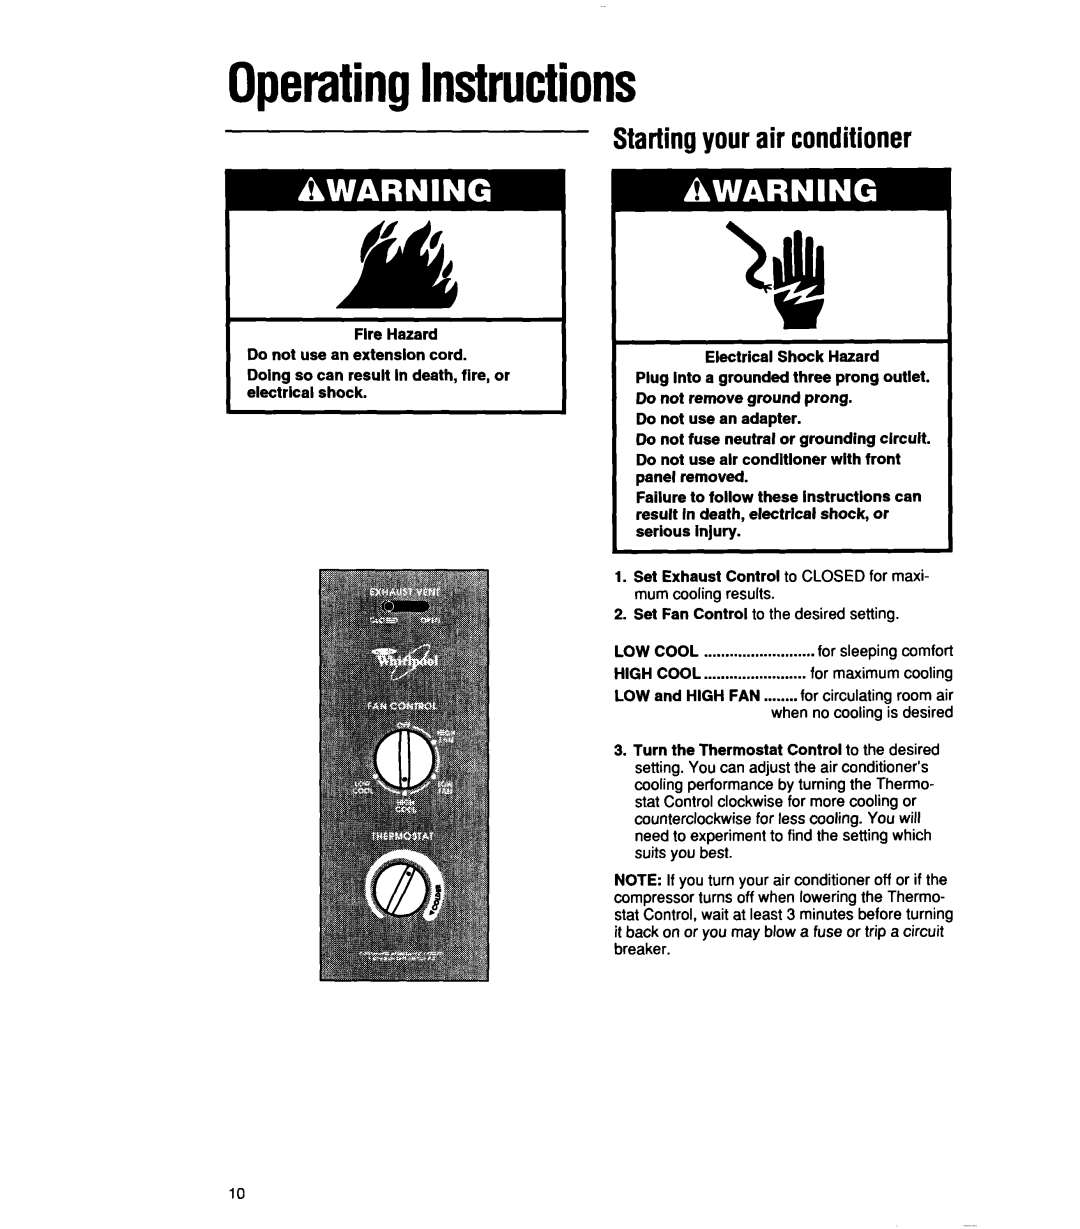 Whirlpool ACU072XE installation instructions OperatingInstructions, Startingyourair conditioner 